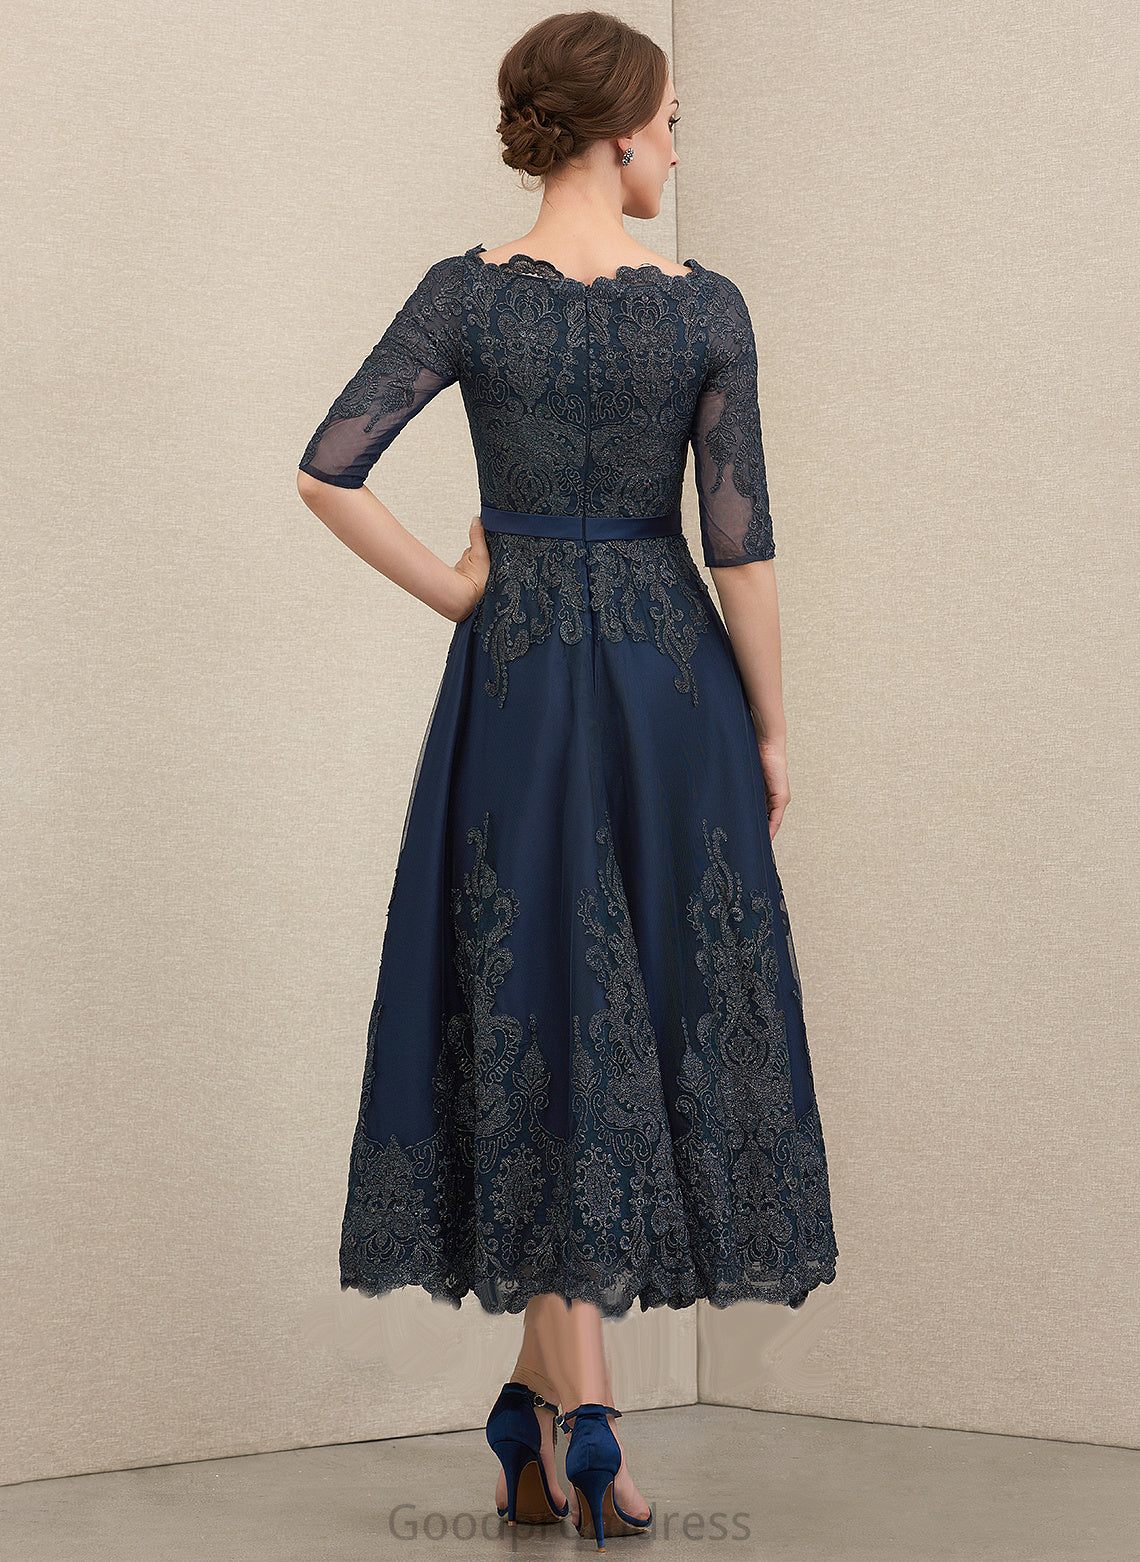 A-Line Bride the Mother of the Bride Dresses Dress Neck Tea-Length Scoop Mother Danna of Lace